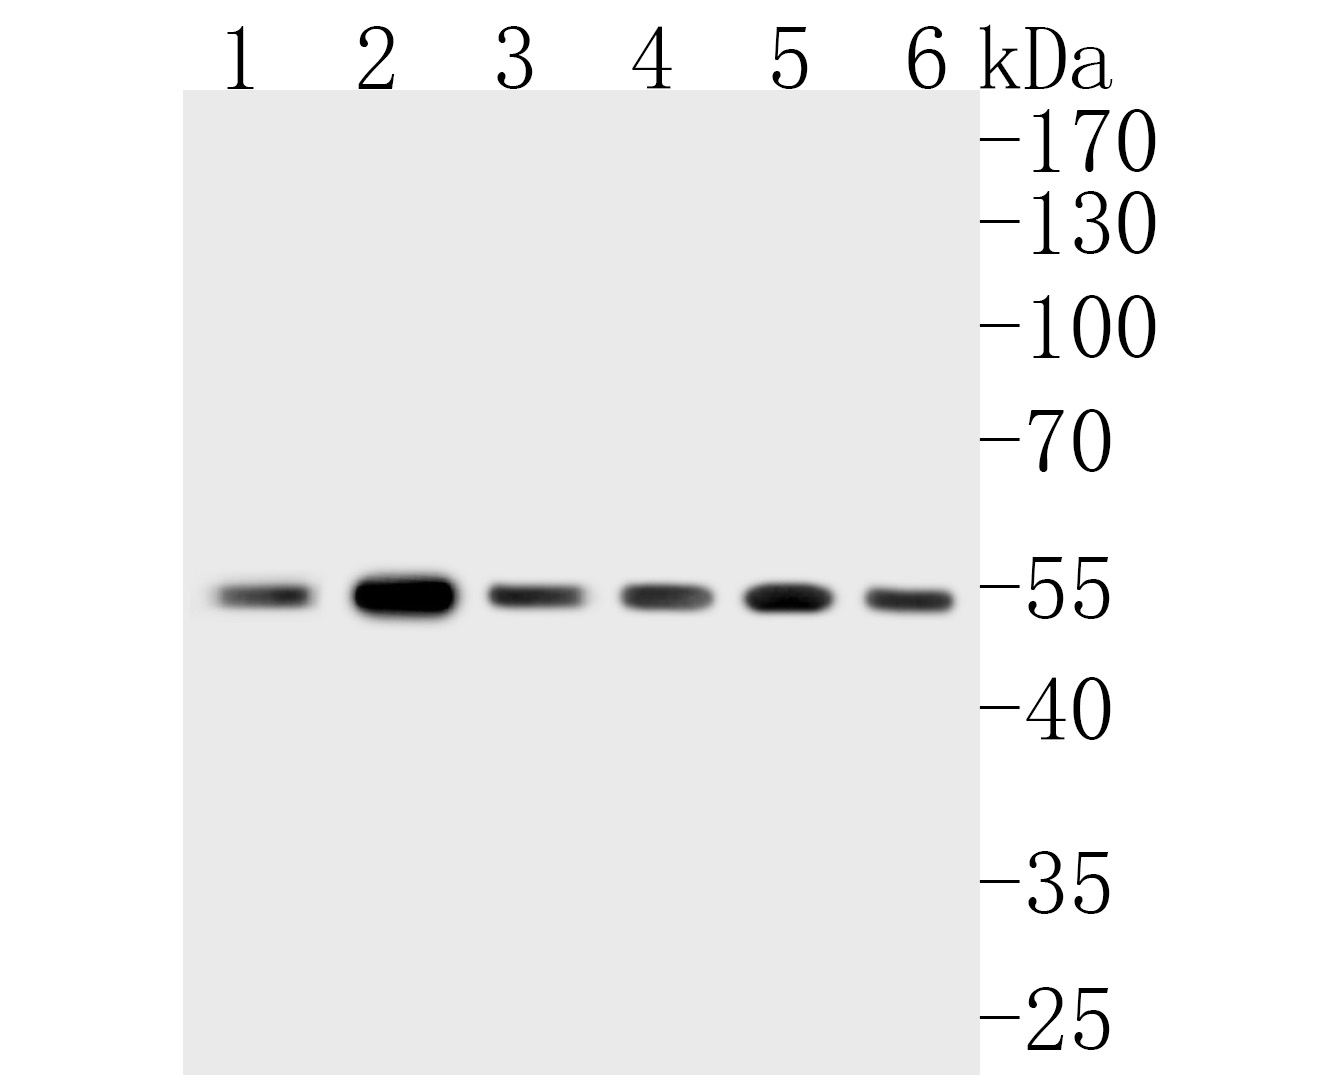 Western blot analysis of FADS1 on different lysates. Proteins were transferred to a PVDF membrane and blocked with 5% BSA in PBS for 1 hour at room temperature. The primary antibody (ET7111-19, 1/1,000) was used in 5% BSA at room temperature for 2 hours. Goat Anti-Rabbit IgG - HRP Secondary Antibody (HA1001) at 1:5,000 dilution was used for 1 hour at room temperature.<br />
Positive control: <br />
Lane 1: rat liver tissue lysate<br />
Lane 2: mouse liver tissue lysate<br />
Lane 3: mouse brain tissue lysate<br />
Lane 4: rat lung tissue lysate<br />
Lane 5: Hela cell lysate<br />
Lane 6: A549 cell lysate